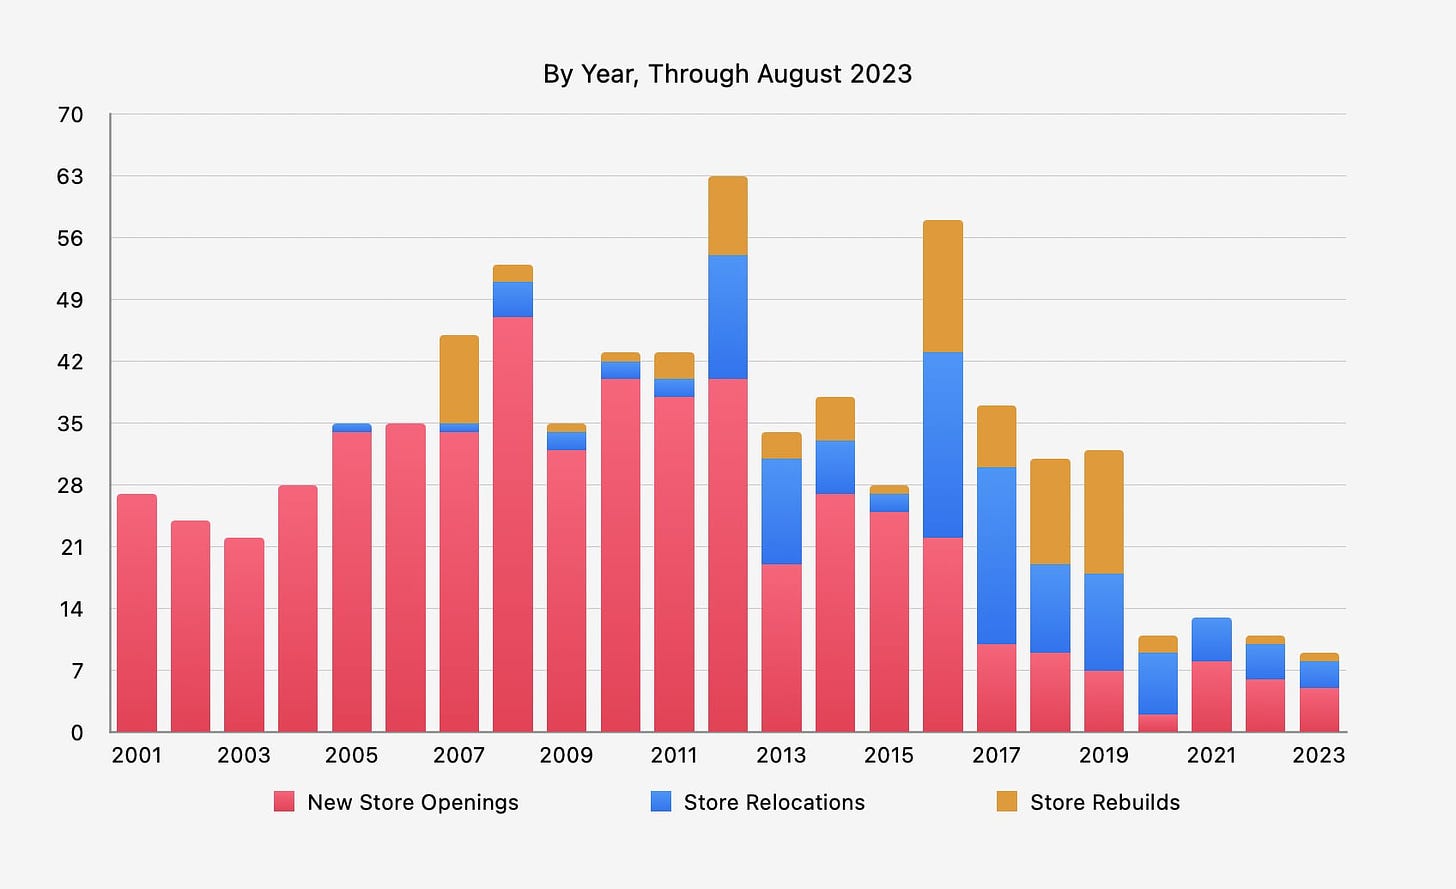 Chart: New Store Openings, Store Relocations, Store Rebuilds by year, through August 2023.